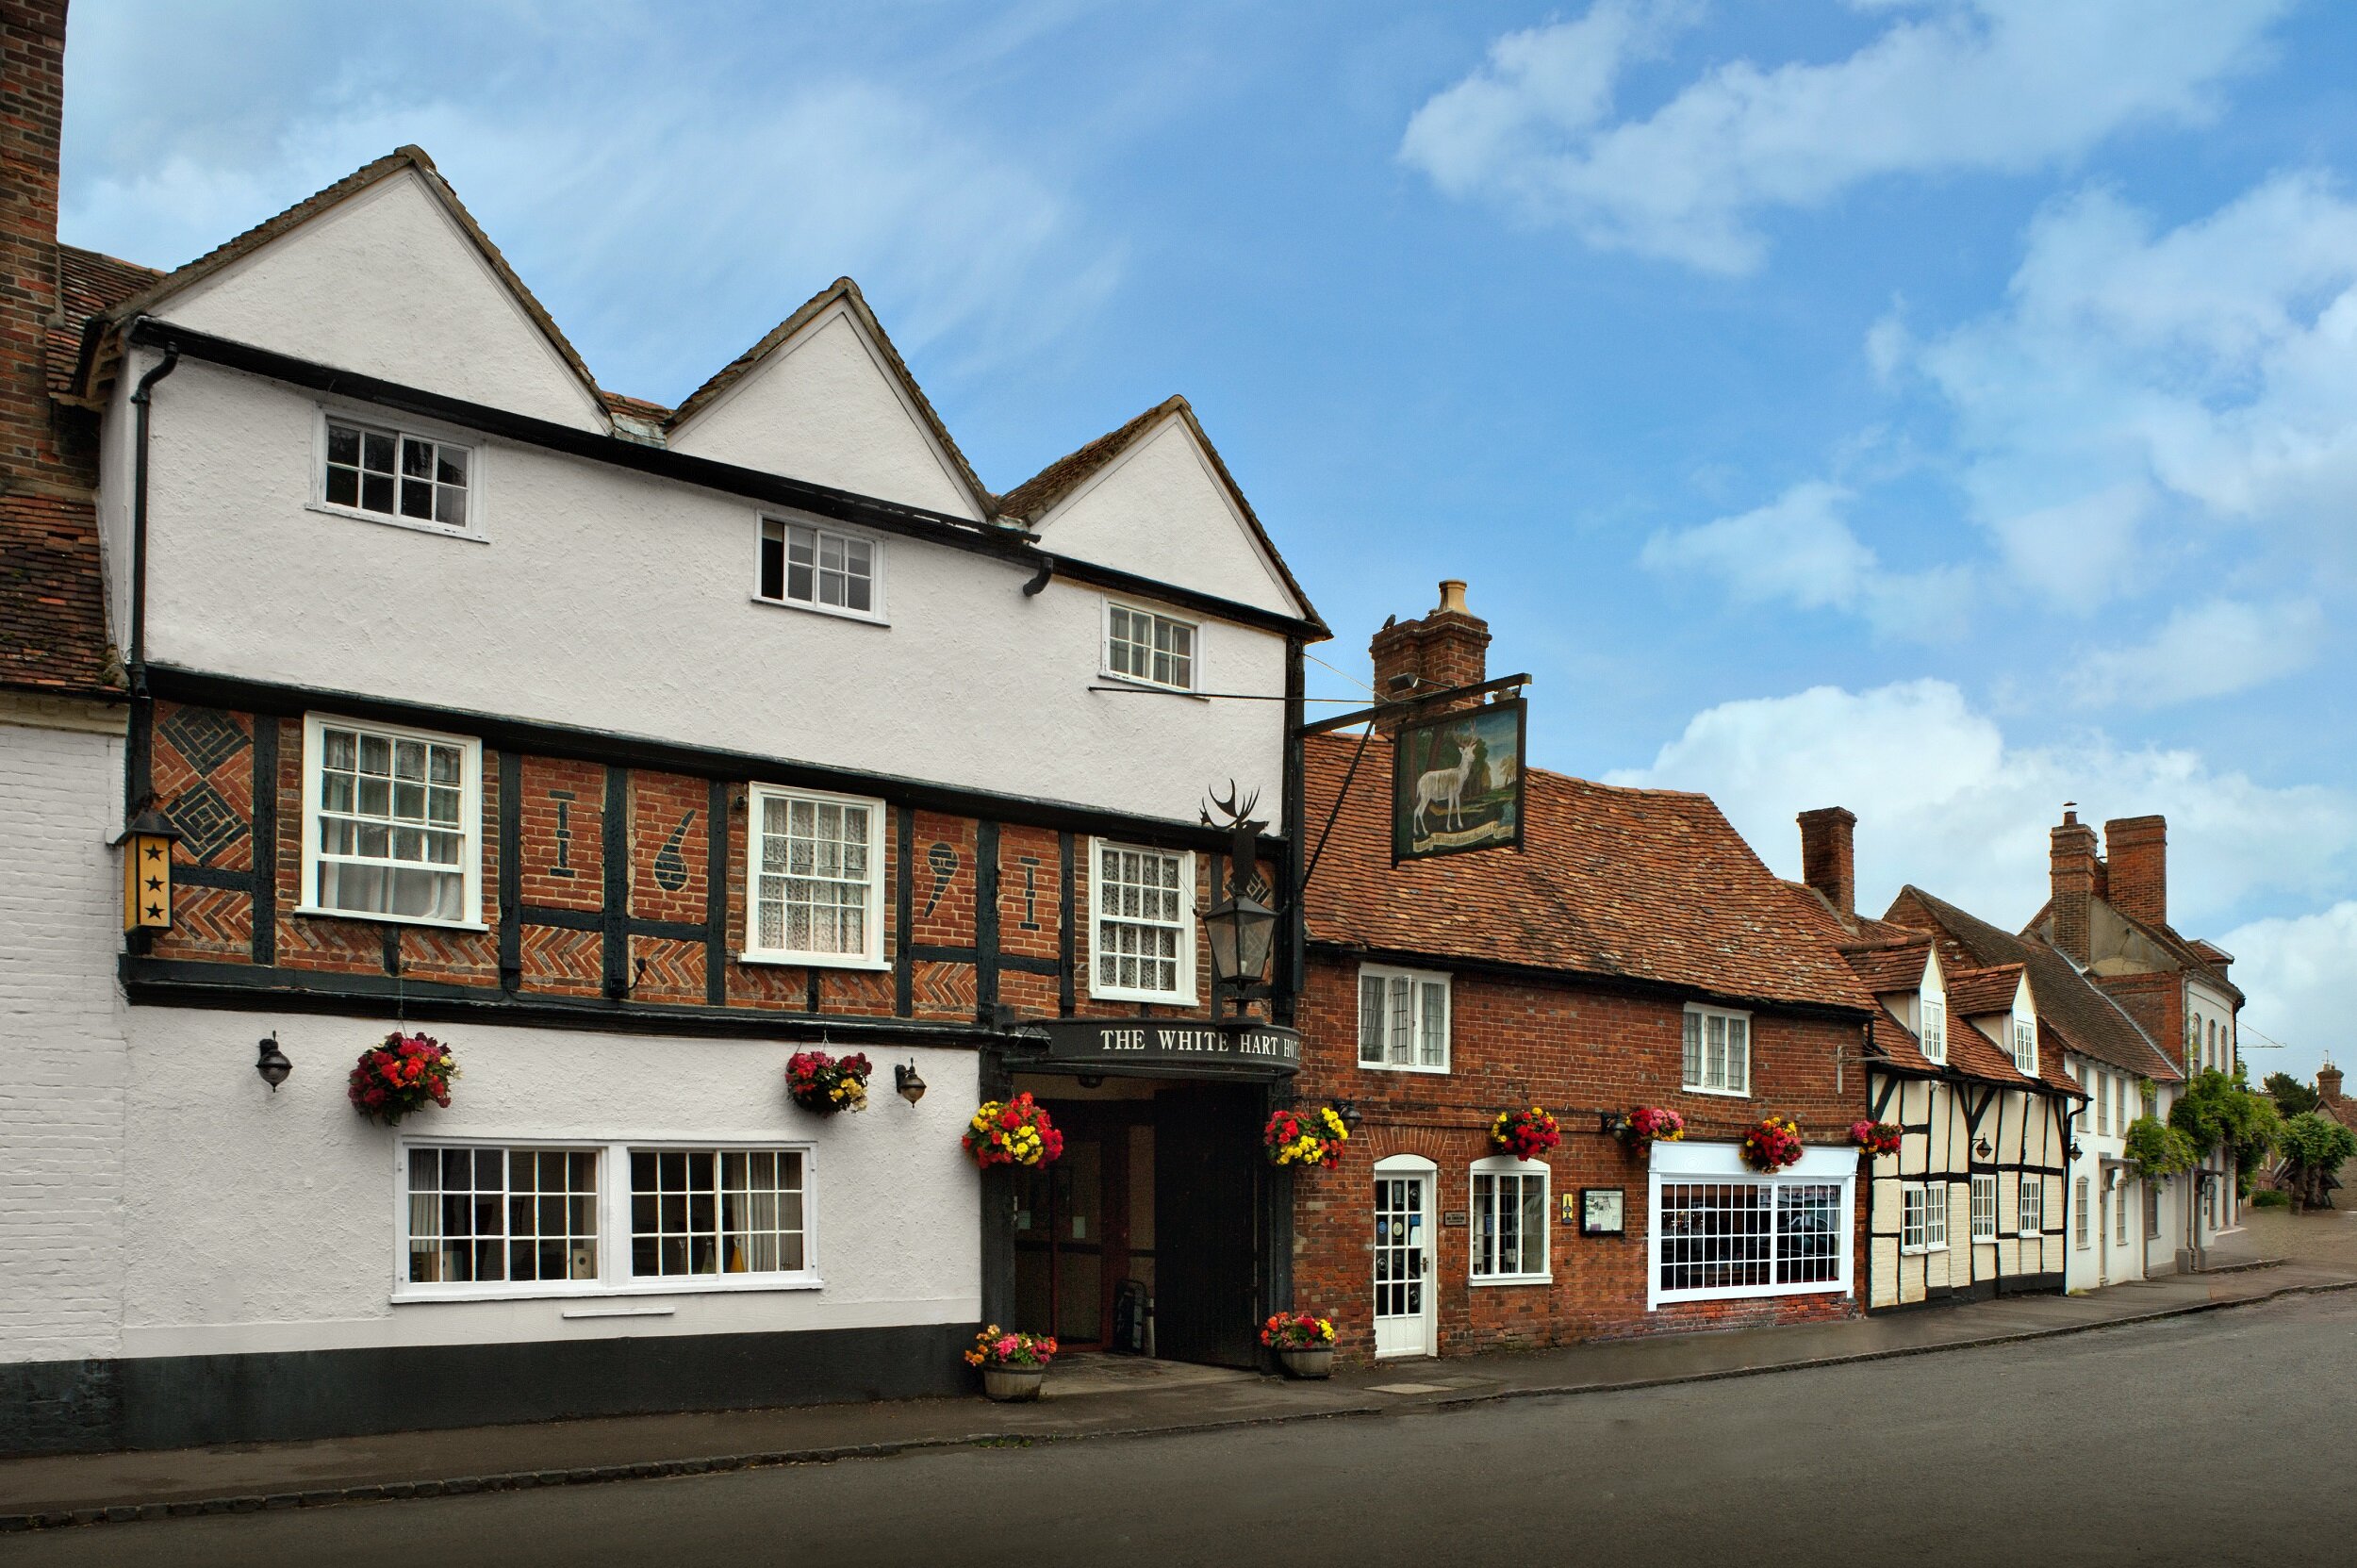 White Hart hotel in Oxfordshire on the market for £1.85m